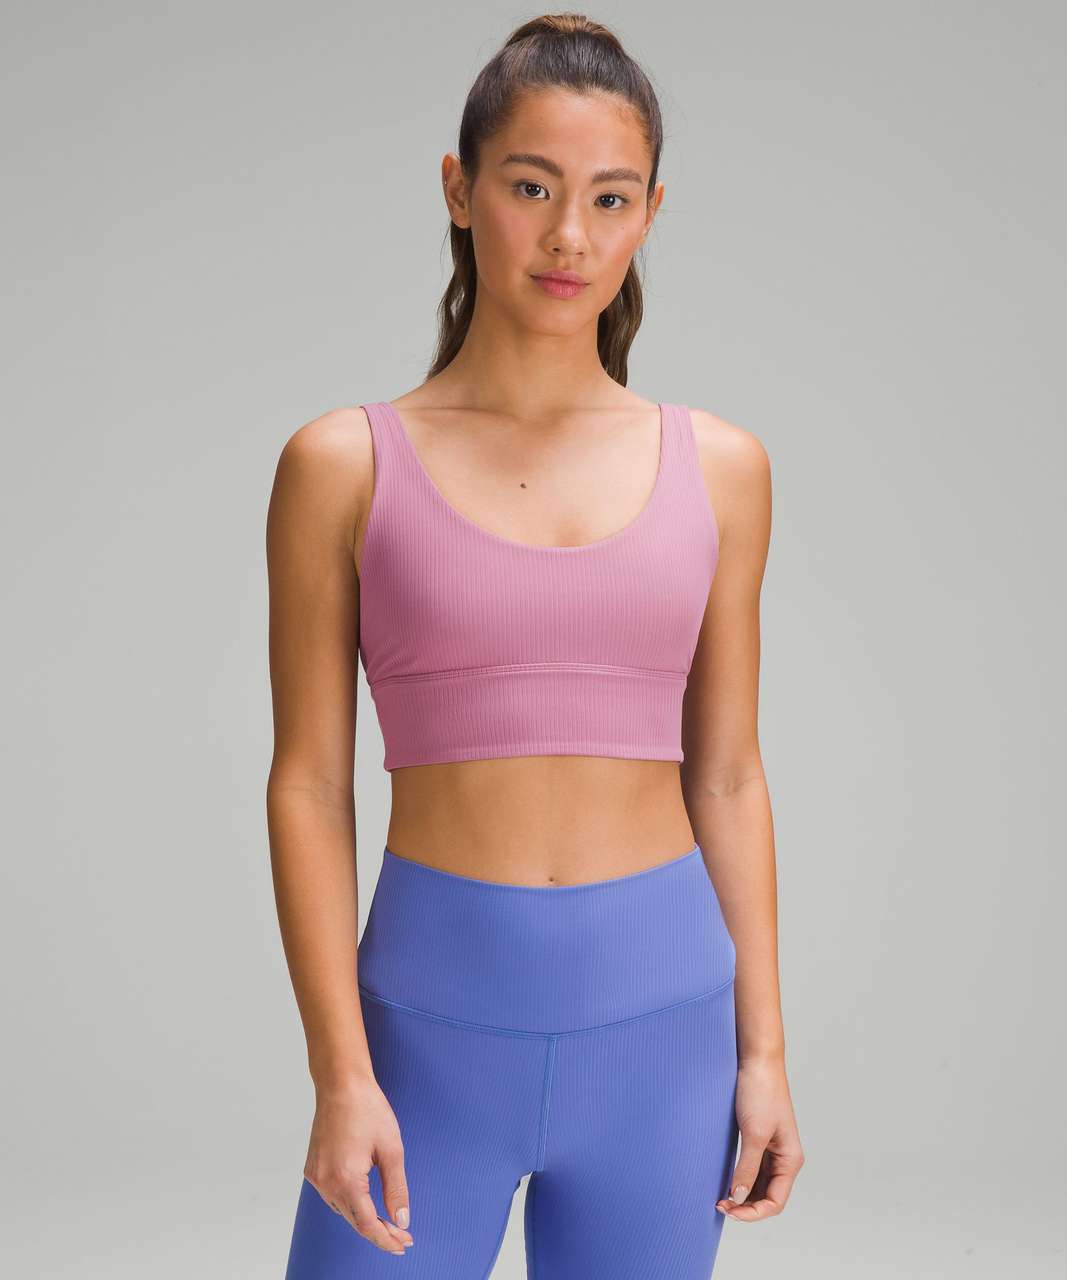 lululemon Align™ Ribbed Bra Light Support, A/B Cup Size 12(M)RRP £58 White  BNWT